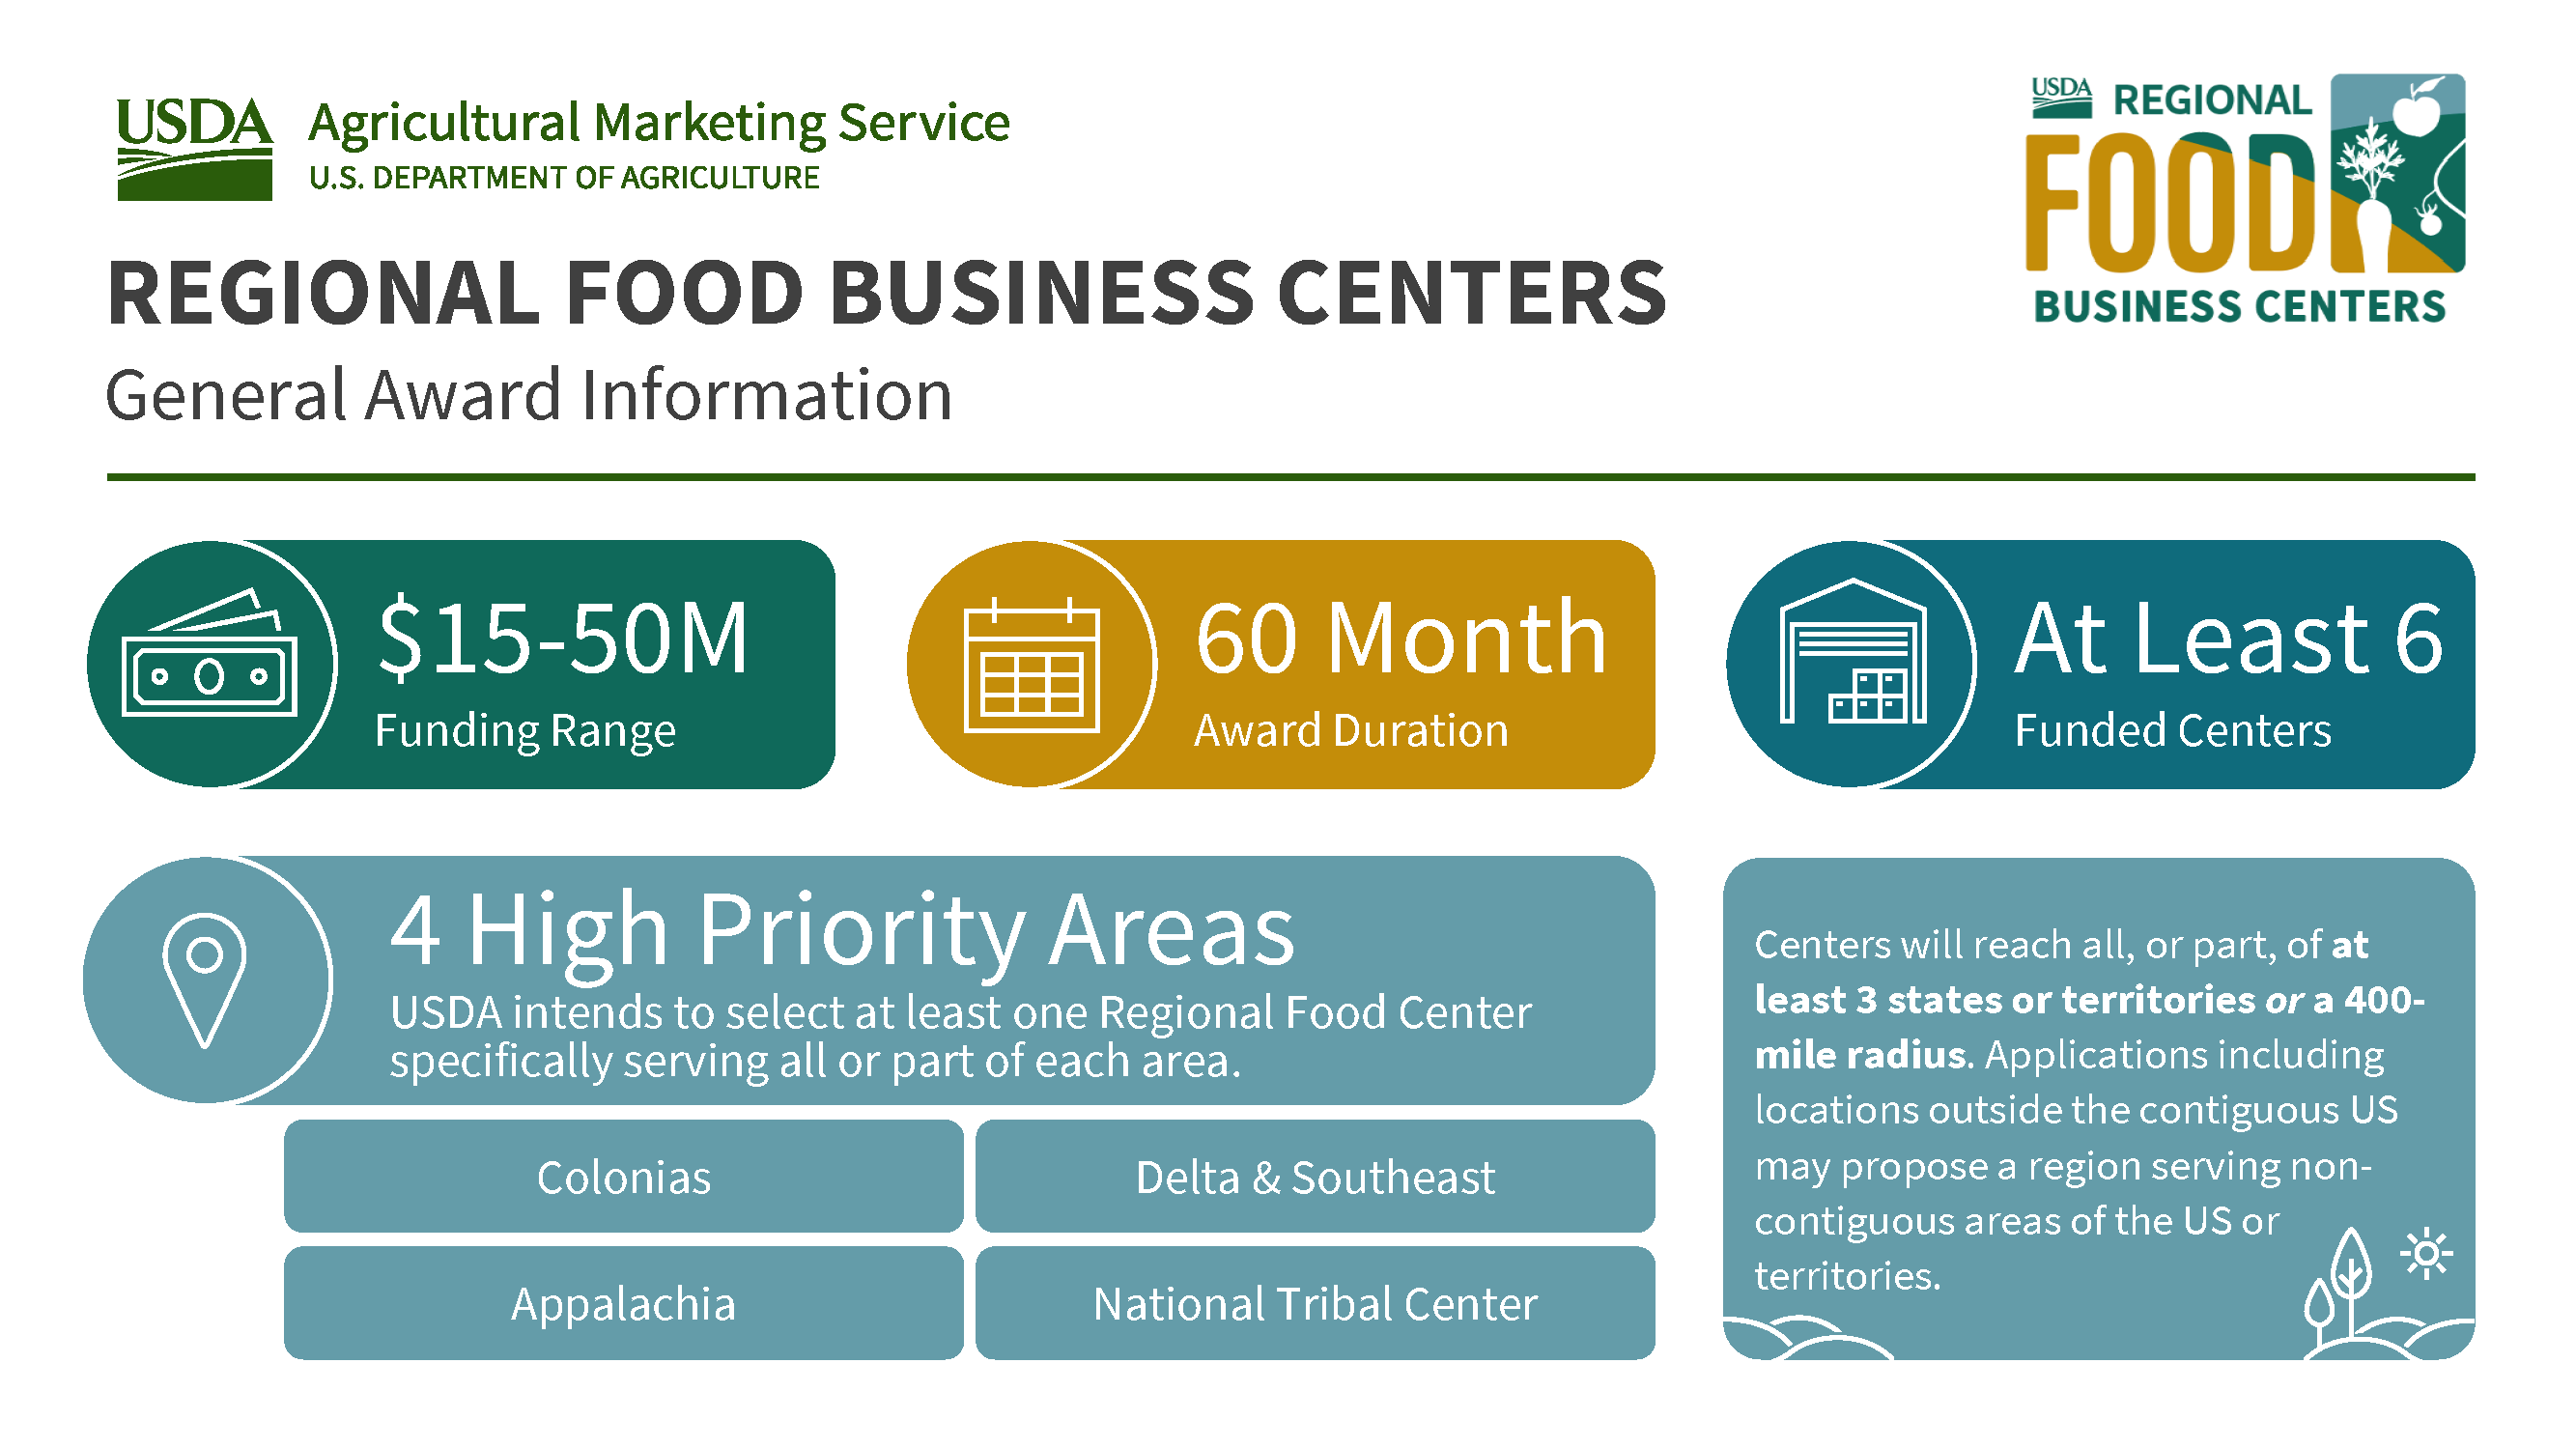 This graphic shows general information for the regional food business centers cooperative agreement. There will be at least six funded centers with a funding range of fifteen to fifty million dollars. The award duration is 60 months. There are four geographic priority areas and USDA plans to select a center that serves all or part of each area. These are colonias, Delta and the southeast, Appalachia, and a National Tribal Center. The Centers will reach all or part of at least three states or a 400 mile radius. Applications including locations outside of the contiguous US may propose a region serving non-contiguous areas of the US or territories. 